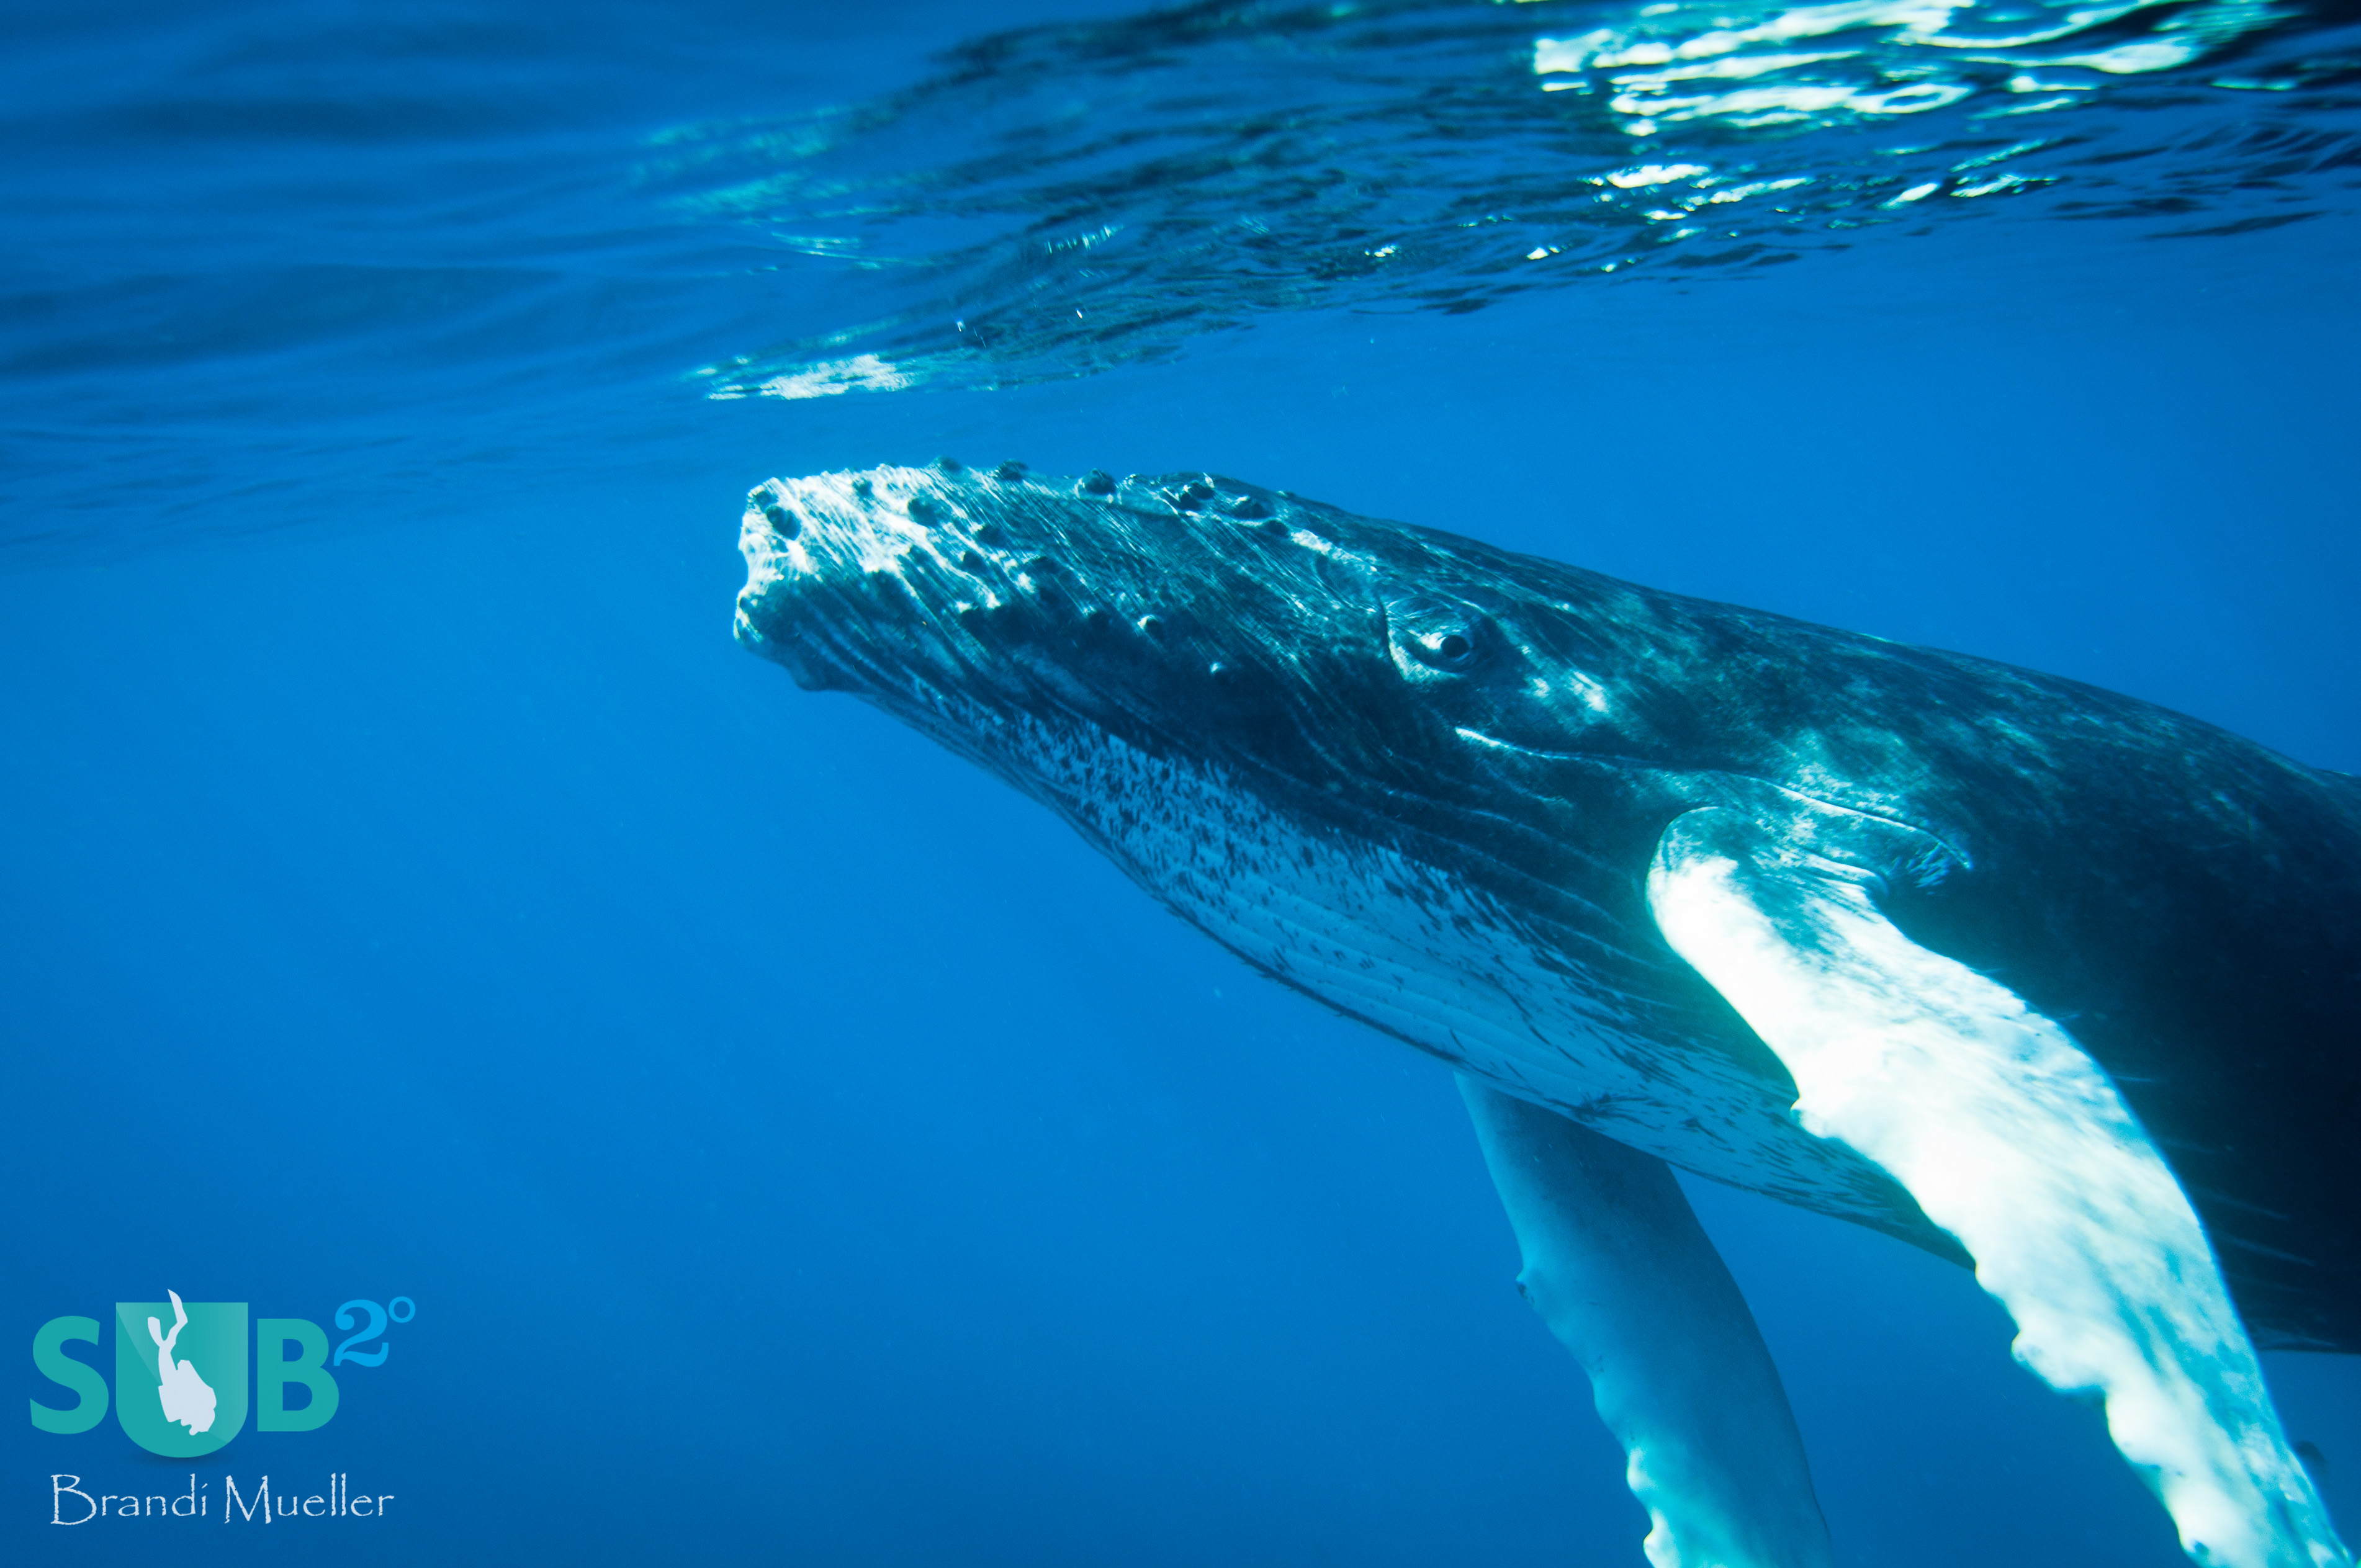 The Dominican Republic is the only country in the world that issues a limited number of permits to snorkel with humpbacks.